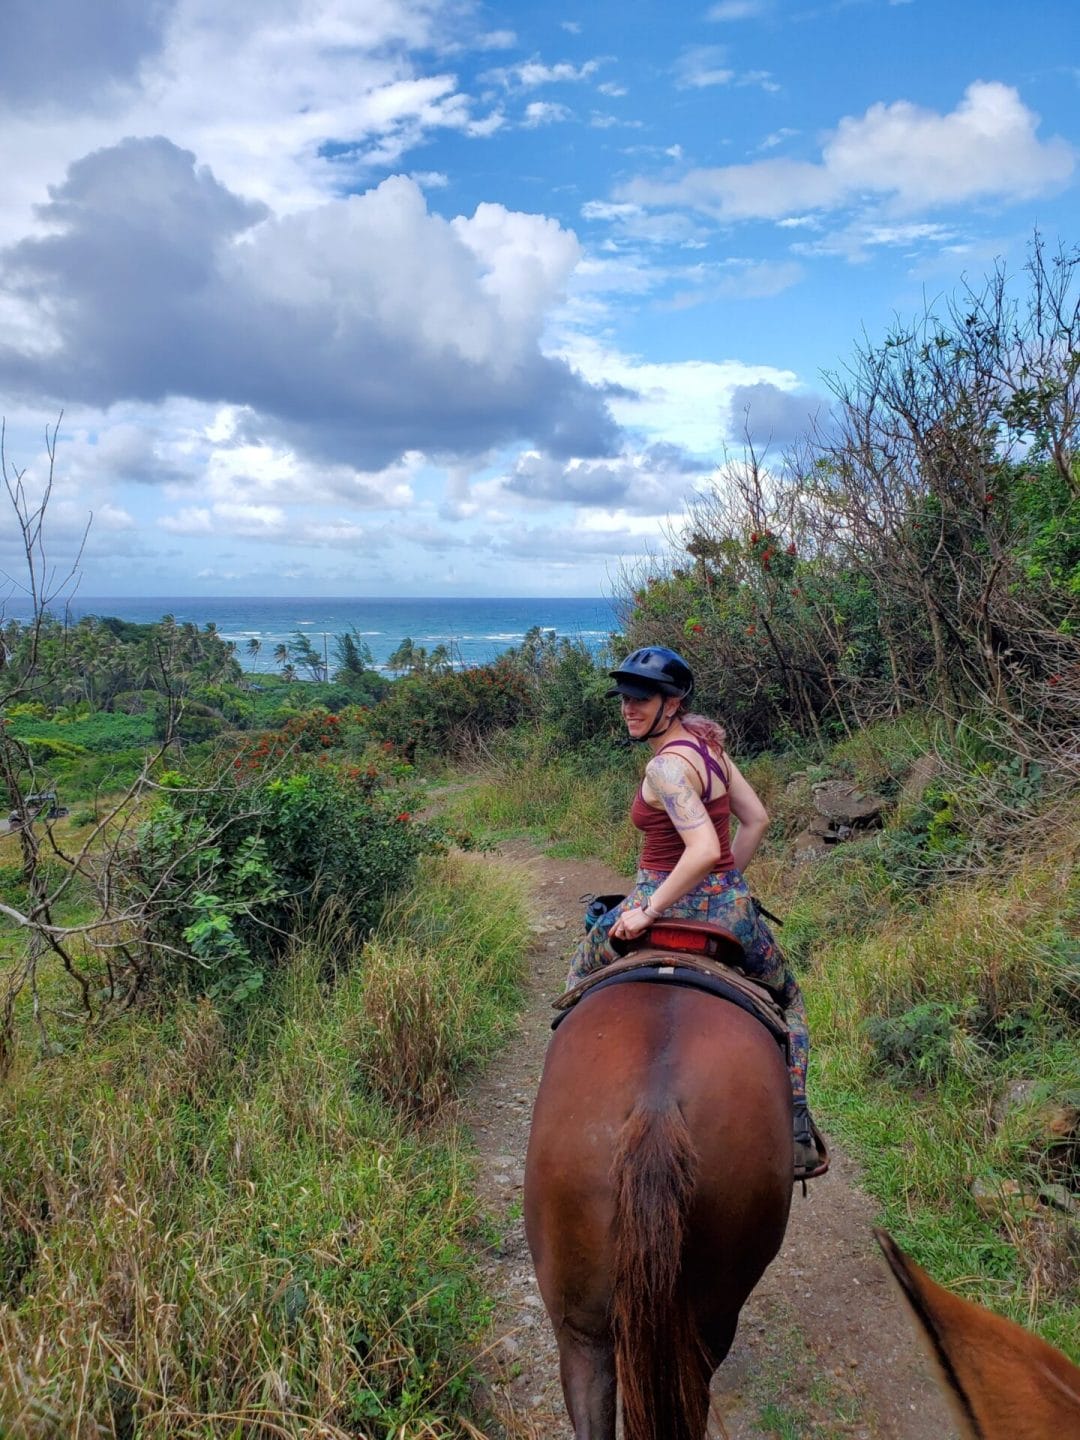 A woman yogi on horseback riding on a mountain trail towards the ocean of the big island of Hawaii under a blue and partly cloudy sky